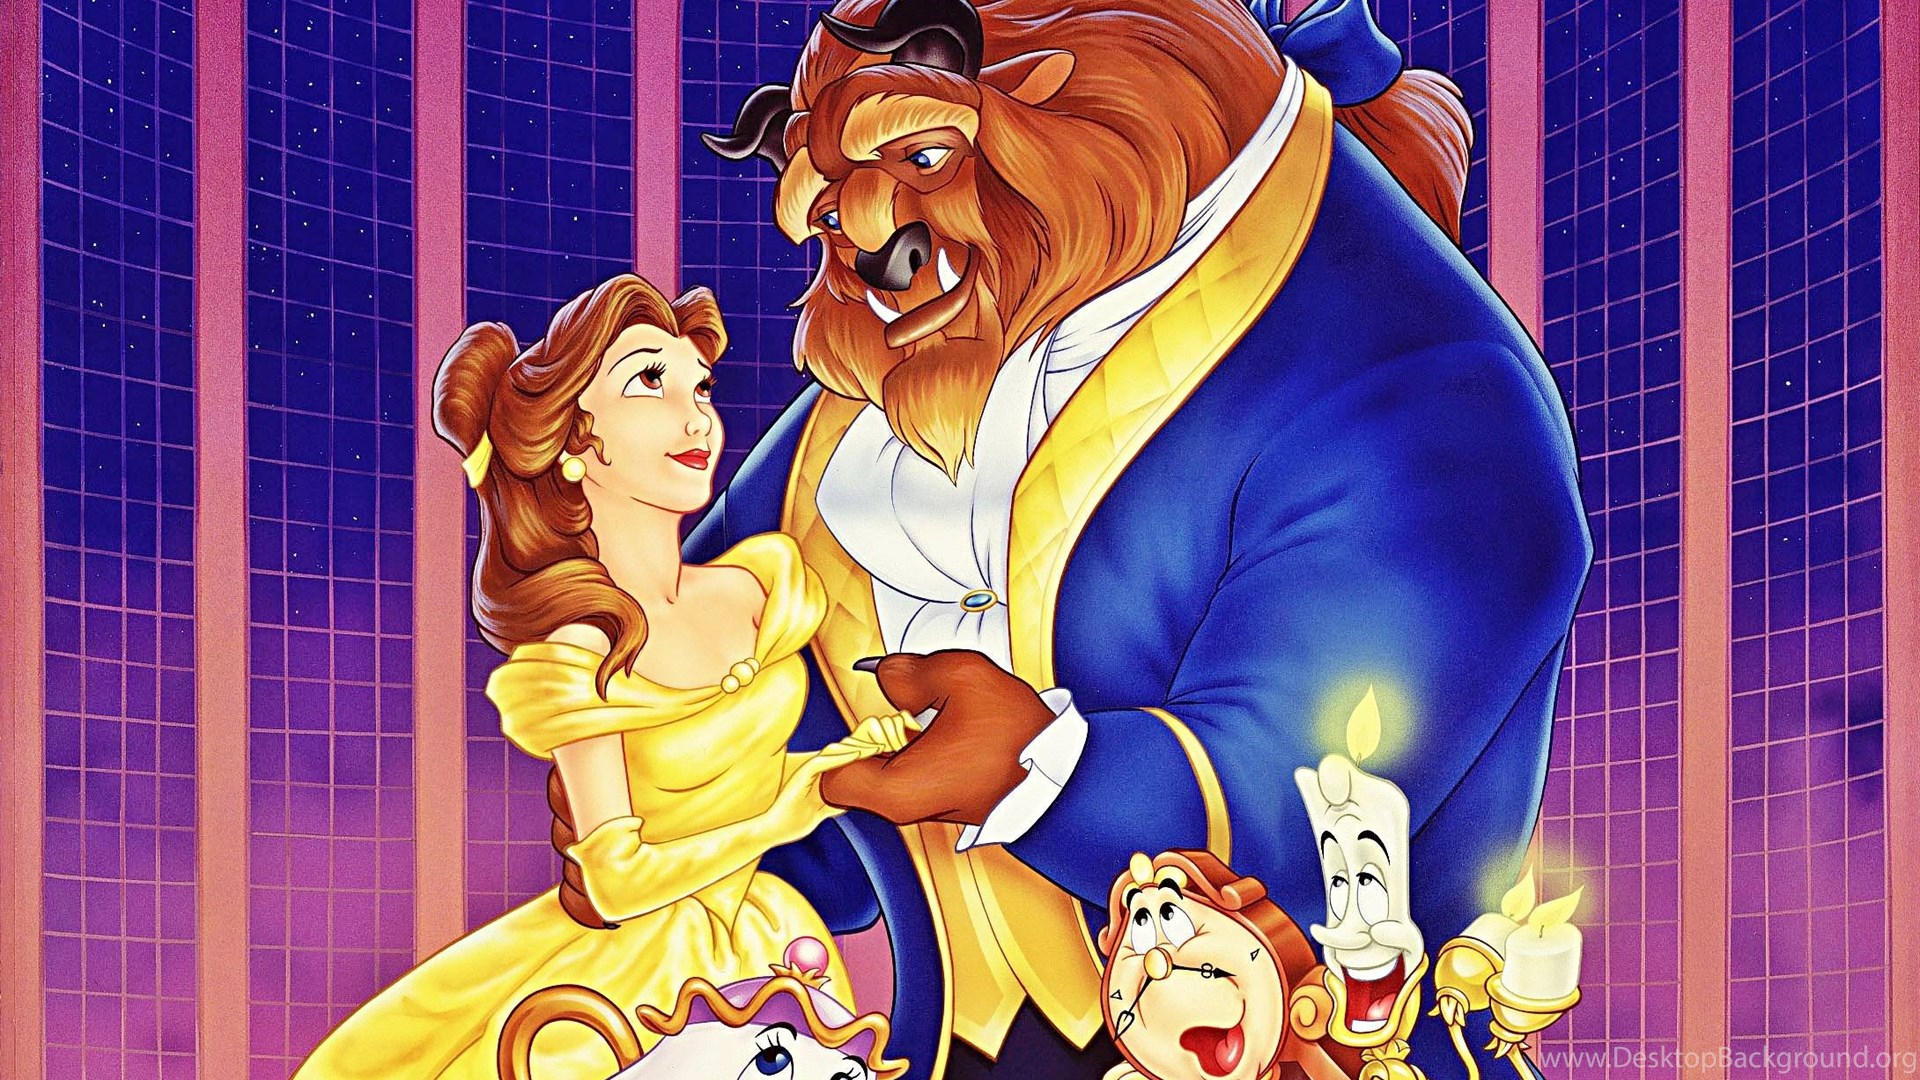 Download Computer Wallpapers, Desktop Backgrounds Beauty And The Beast ... 